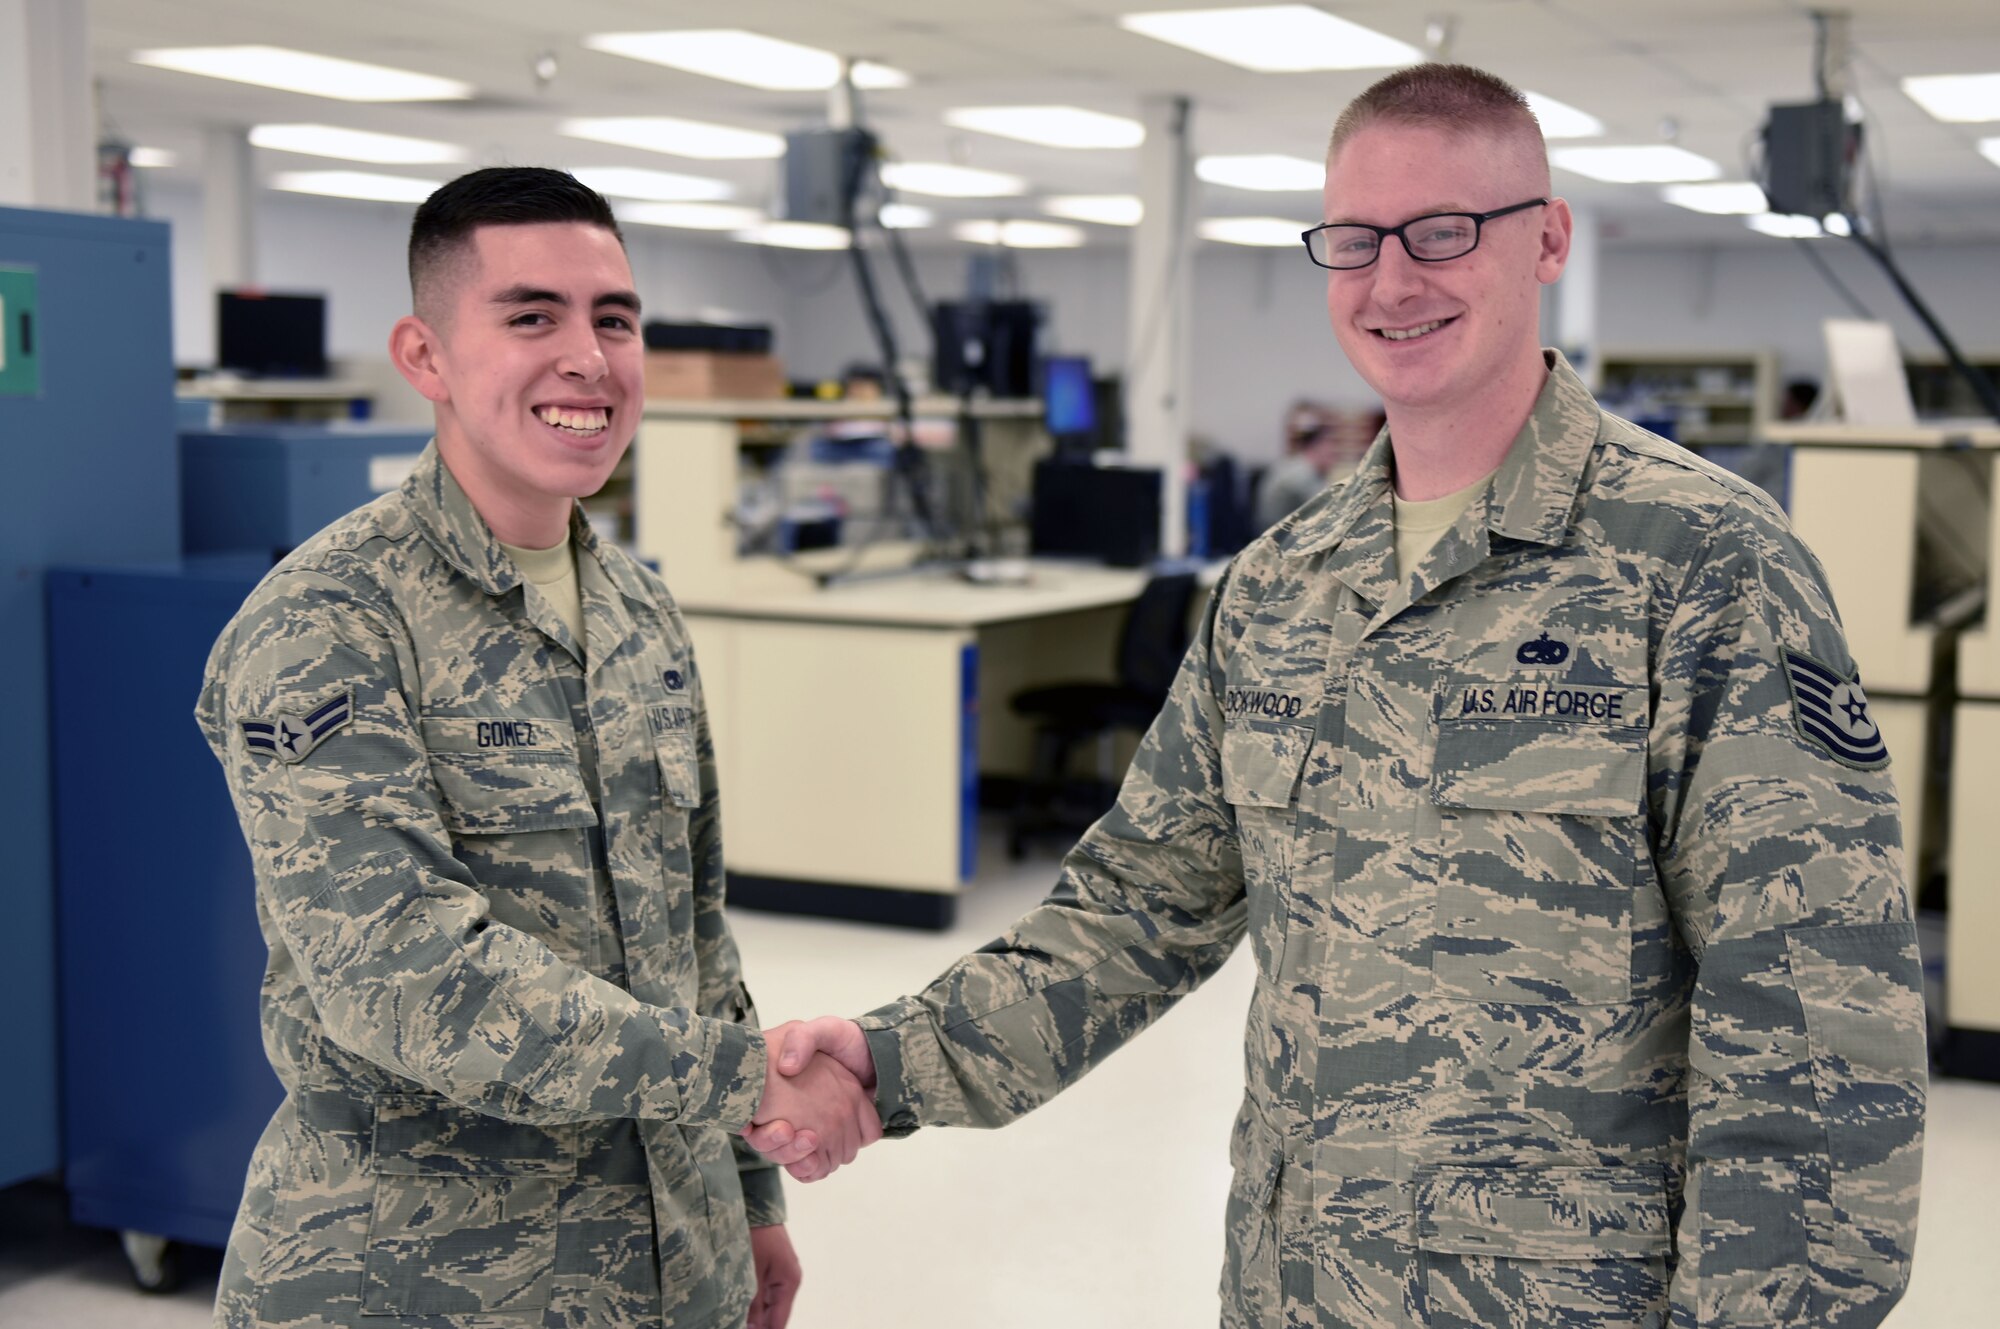 Airman 1st Class Adrian Gomez, 60th Maintenance Squadron precision measurement equipment laboratory technician, stands with his supervisor, Tech Sgt. Benjamin Lockwood, 60th MXS WaveformAnalysis non-commissioned officer in charge, May 2 at Travis Air Force Base, Calif. Lockwood says that despite the language barrier between Gomez and other Airmen in the PMEL flight, Gomez gets along with everyone he works with and maintains a diligent and meticulous work ethic. (U.S. Air Force photo by Airman 1st Class Christian Conrad)